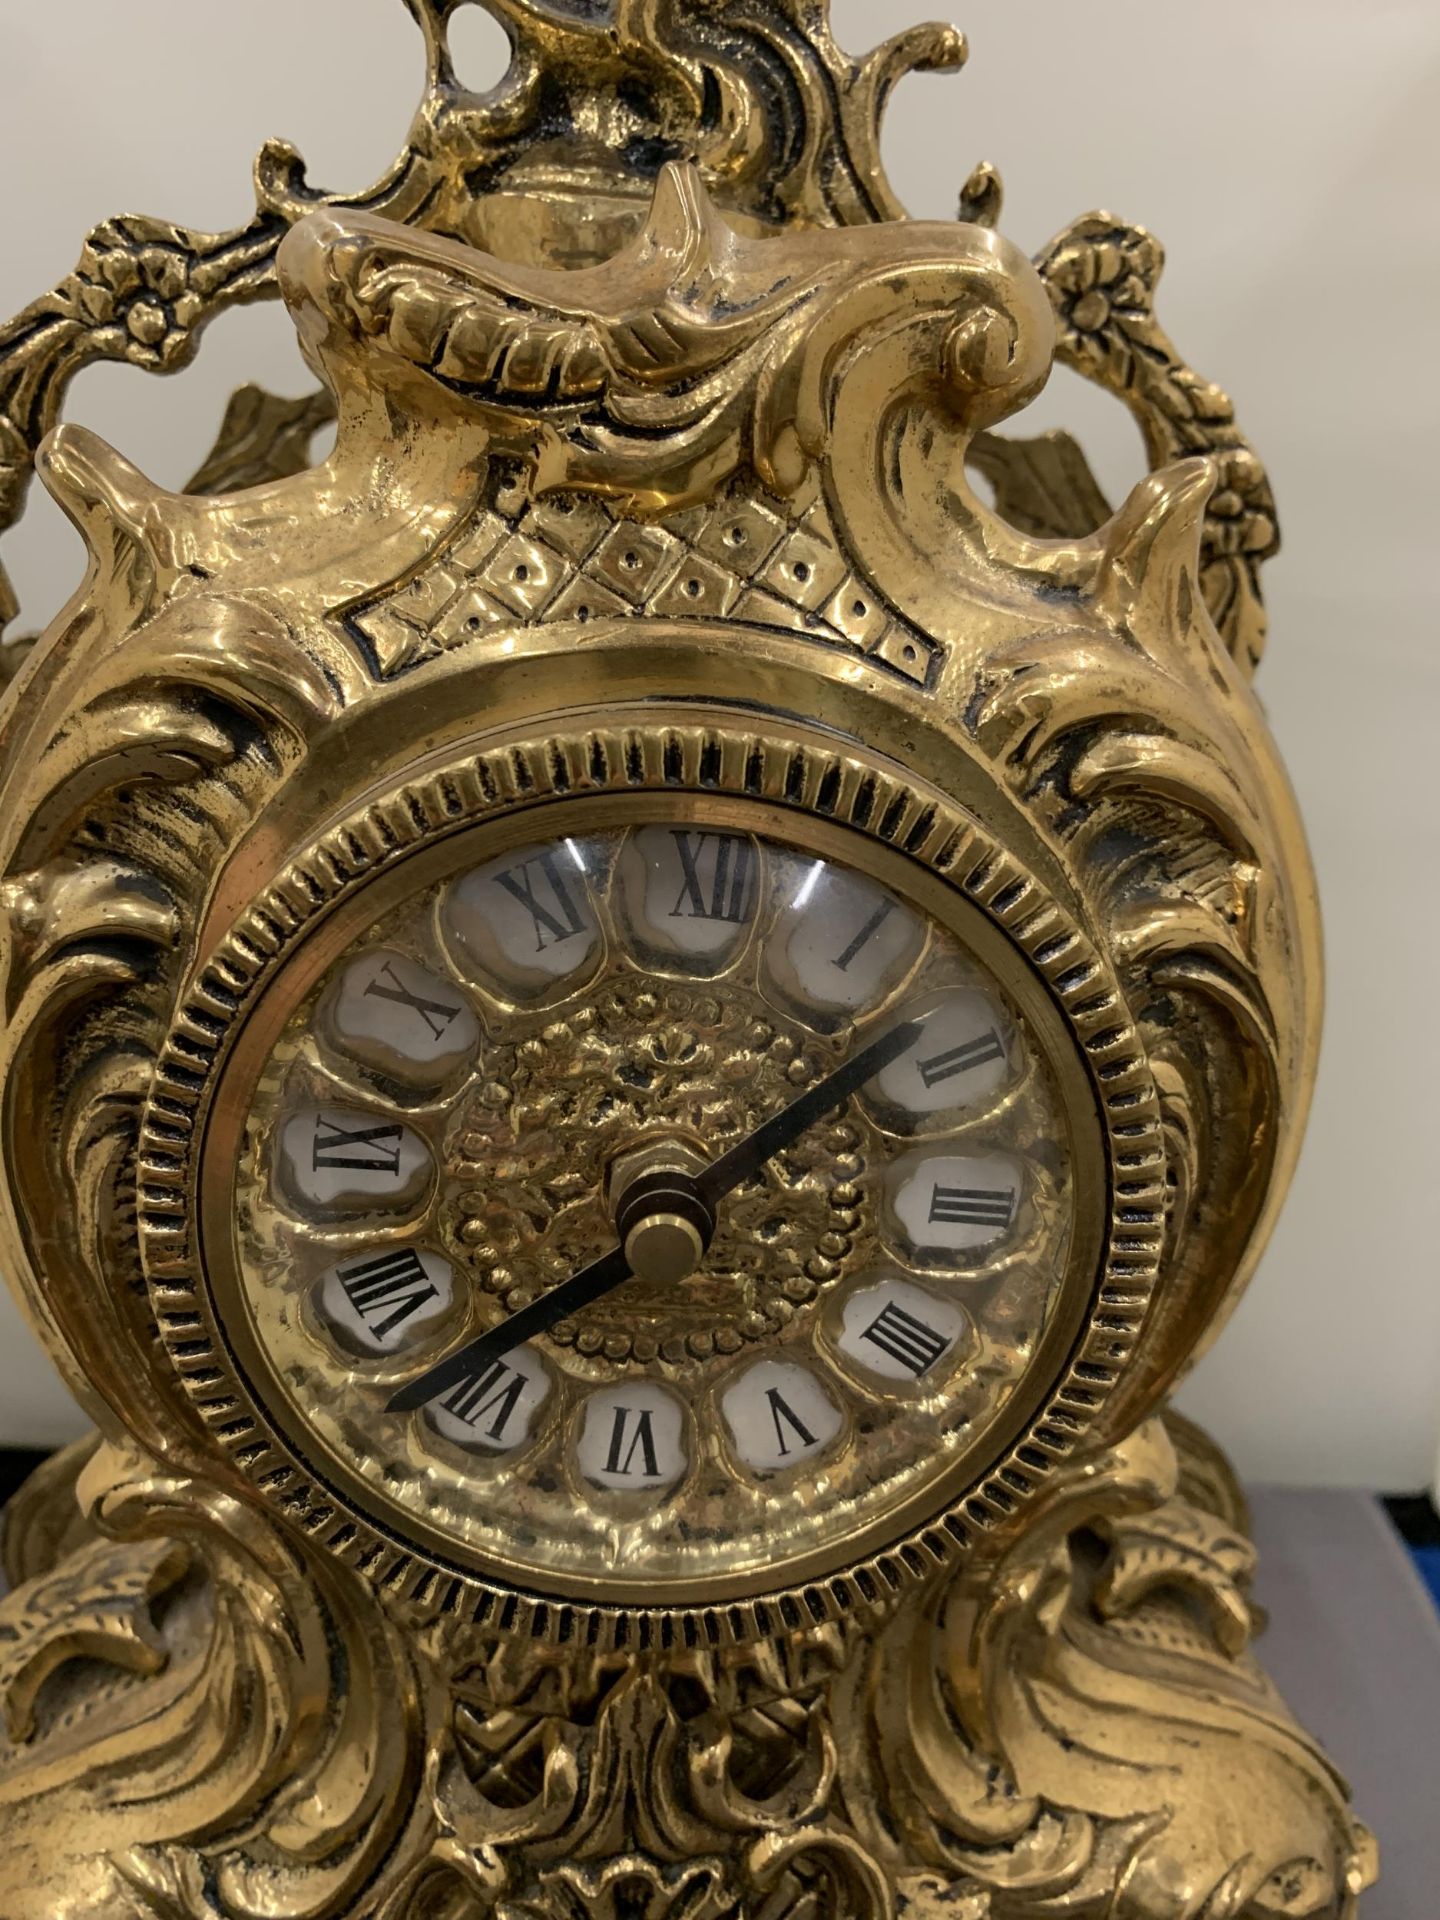 AN ORNATE GILT MANTLE CLOCK WITH ROMAN NUMERALS - Image 2 of 5